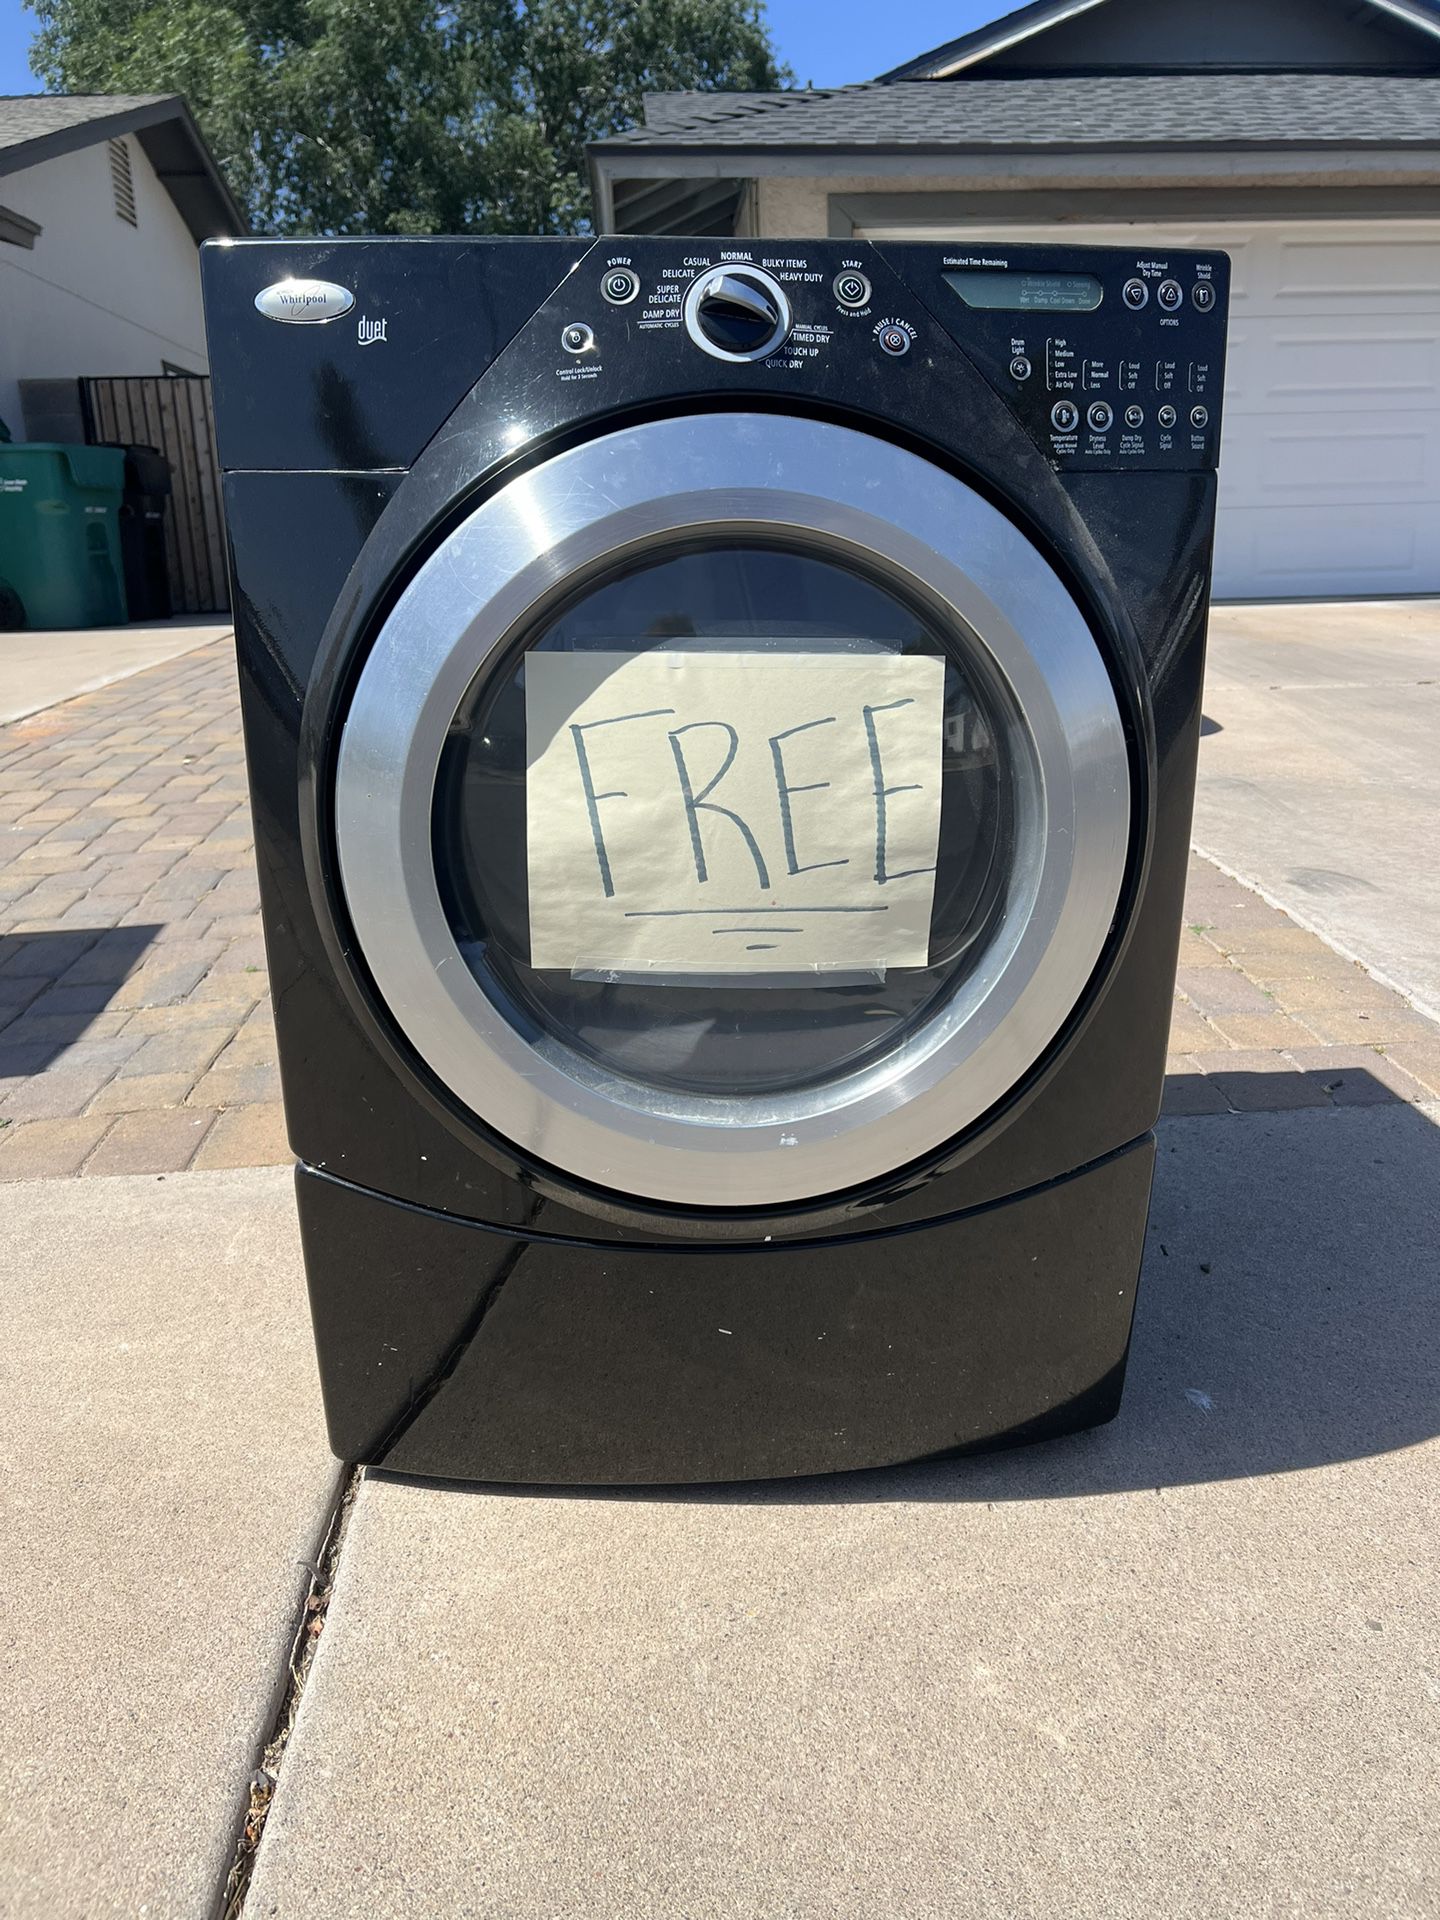 Free Clothes Dryer (not working)